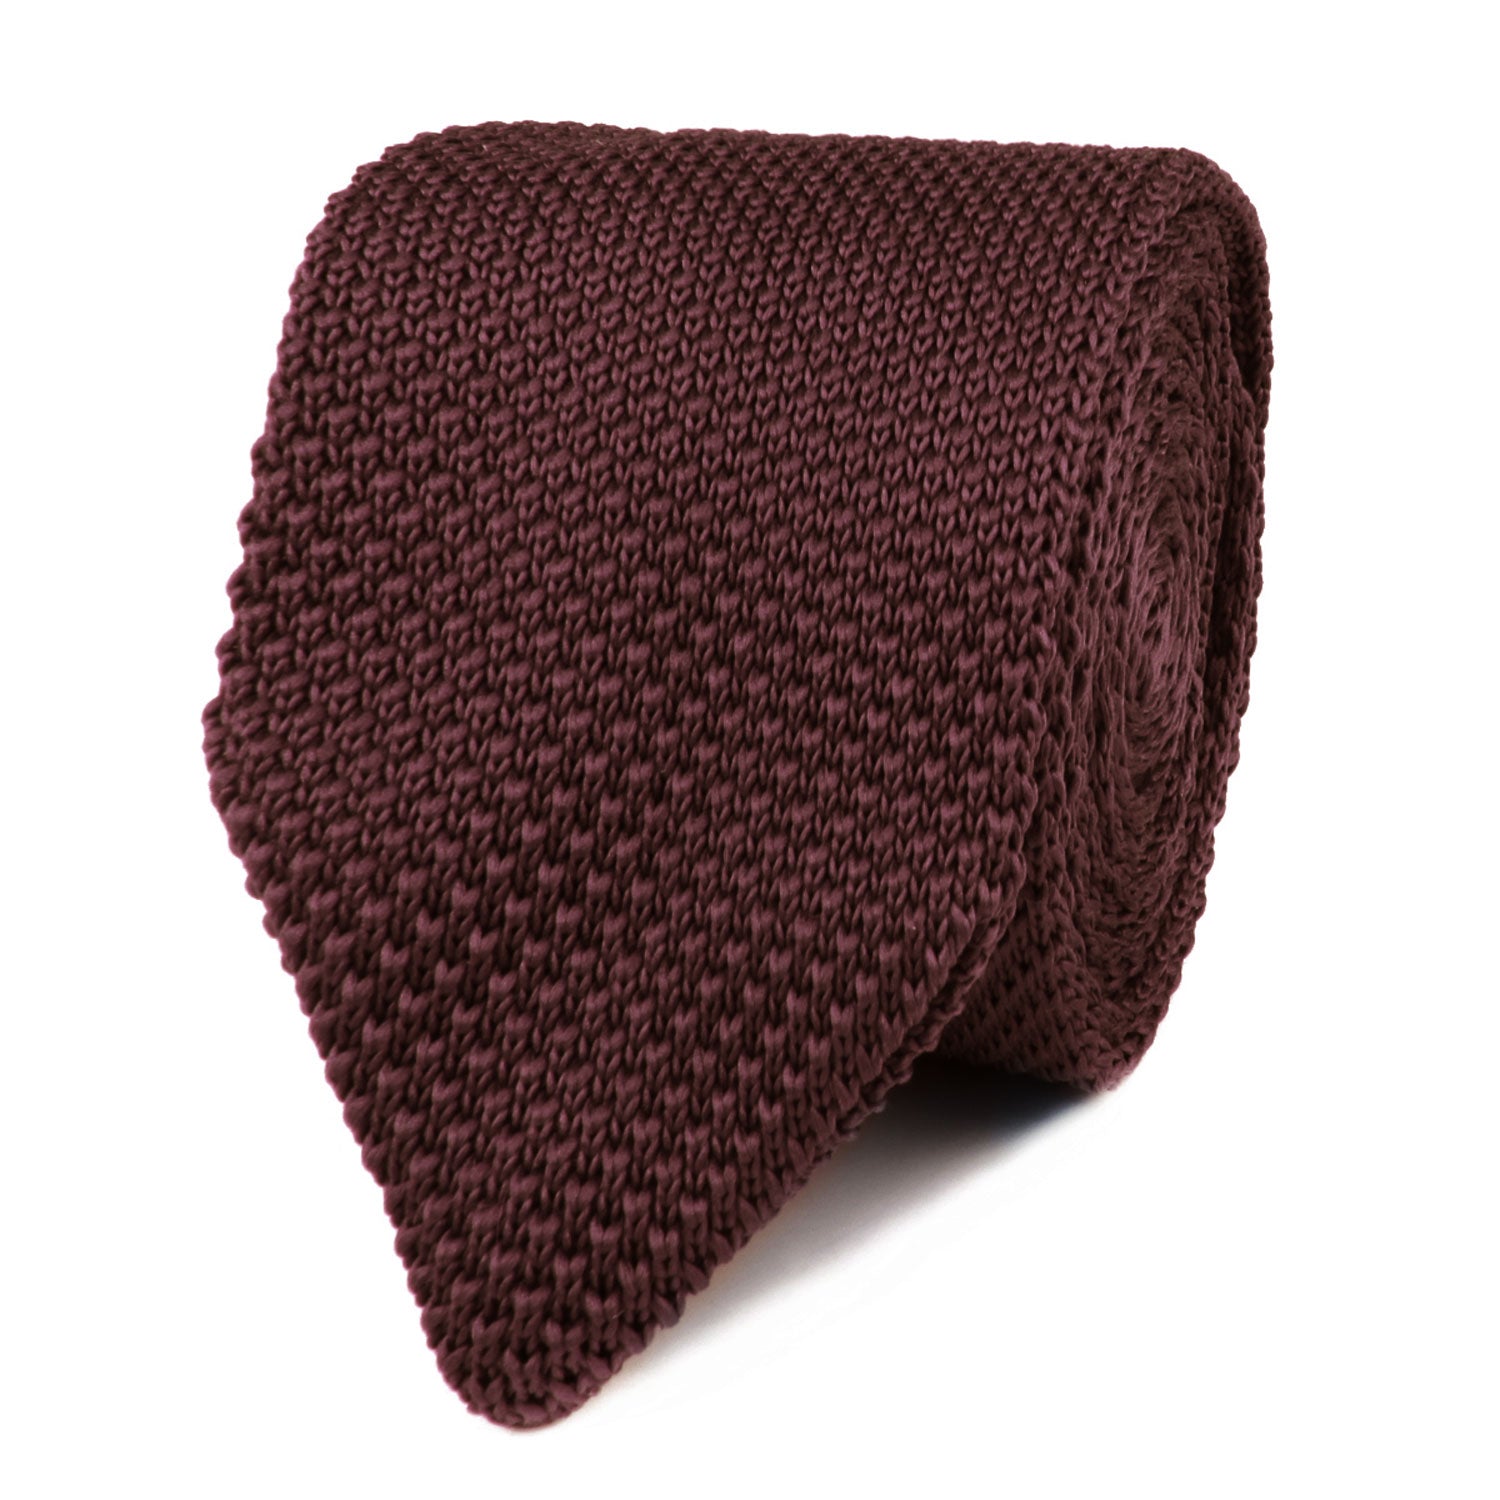 Hiraeth Brown Knitted Tie